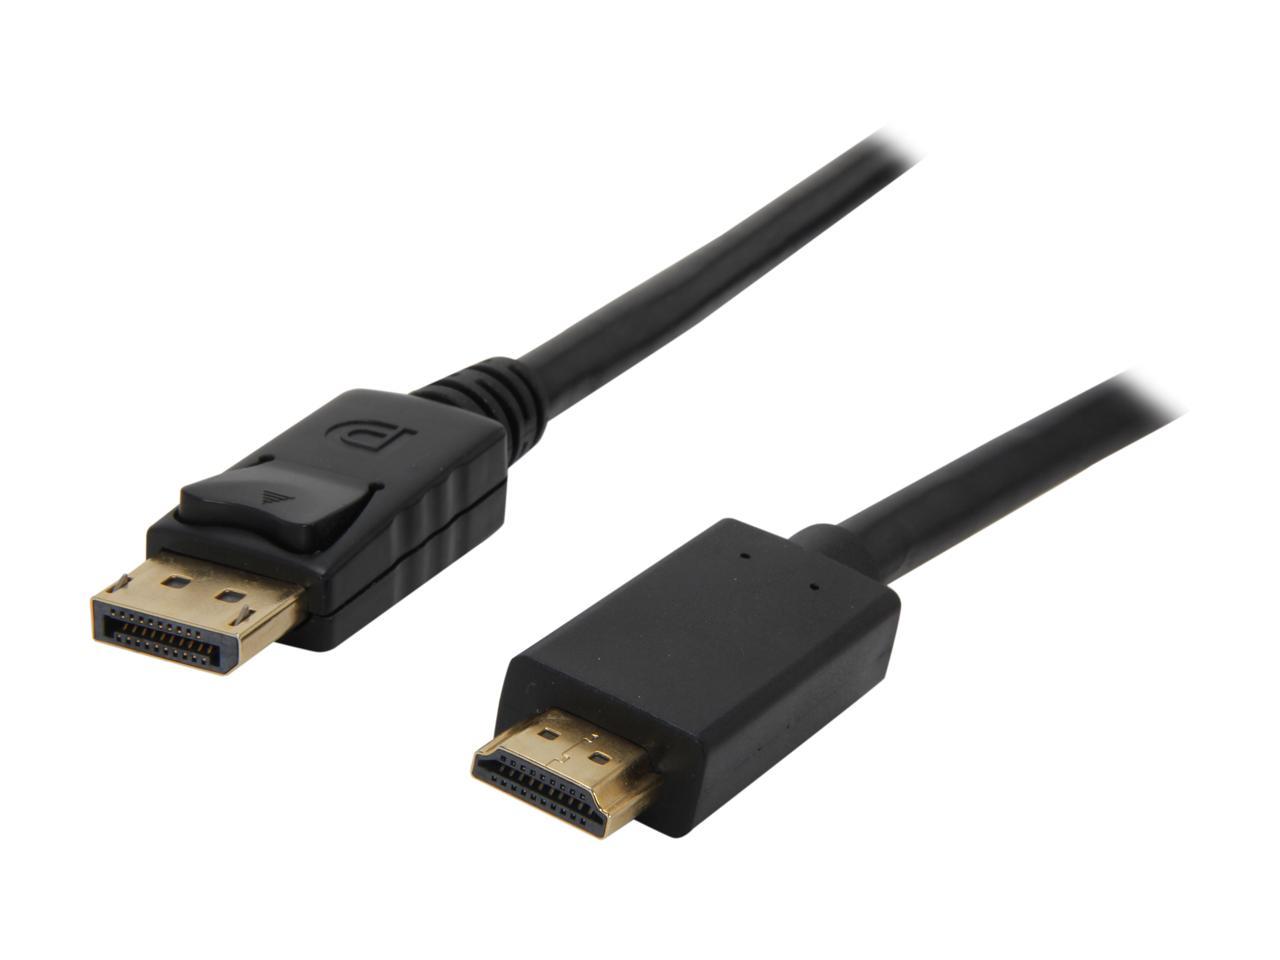 Nippon Labs DP-HDMI-6 6 ft. DisplayPort to HDMI Converter Cable Supporting VR / 3D / 4K, Black - DP to HDMI Adapter - (M/M) - image 1 of 3